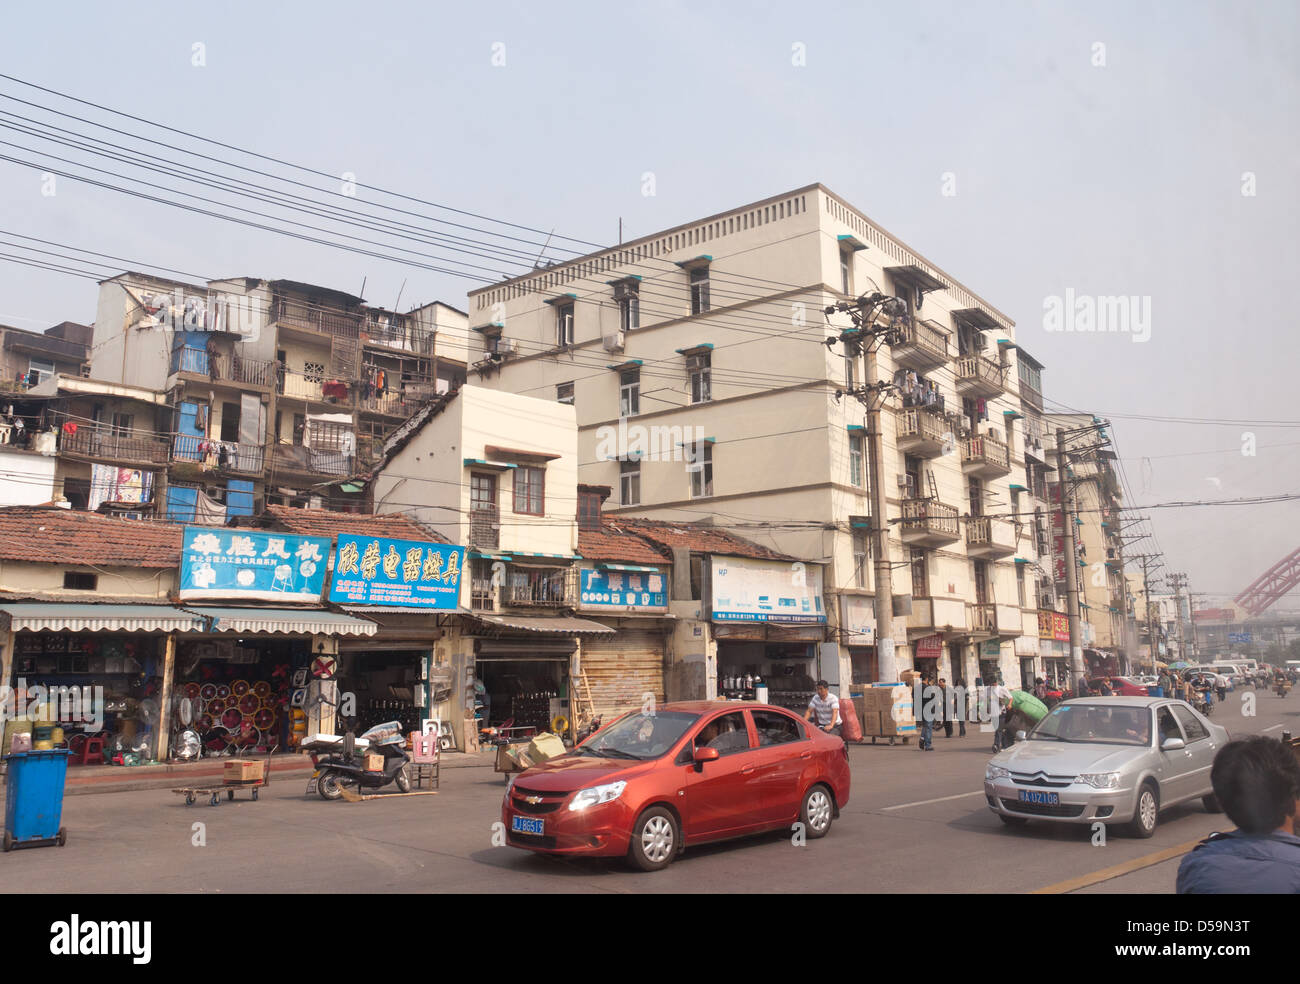 the old buildings in Wuhan city, China Stock Photo